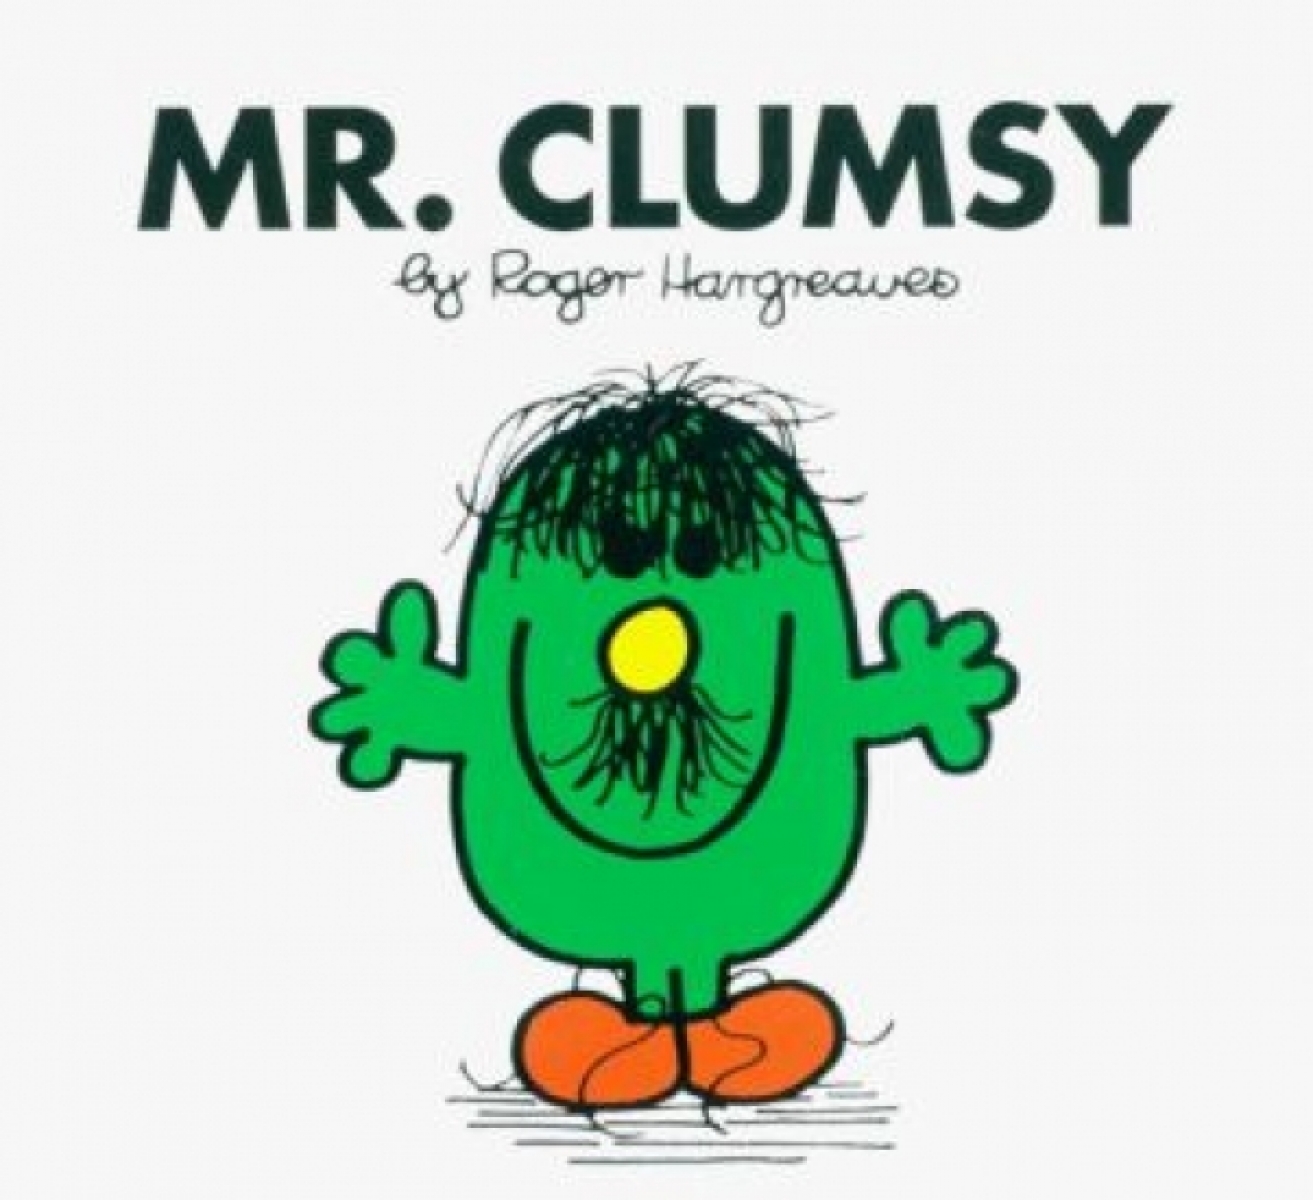 Hargreaves Roger Mr. Clumsy 